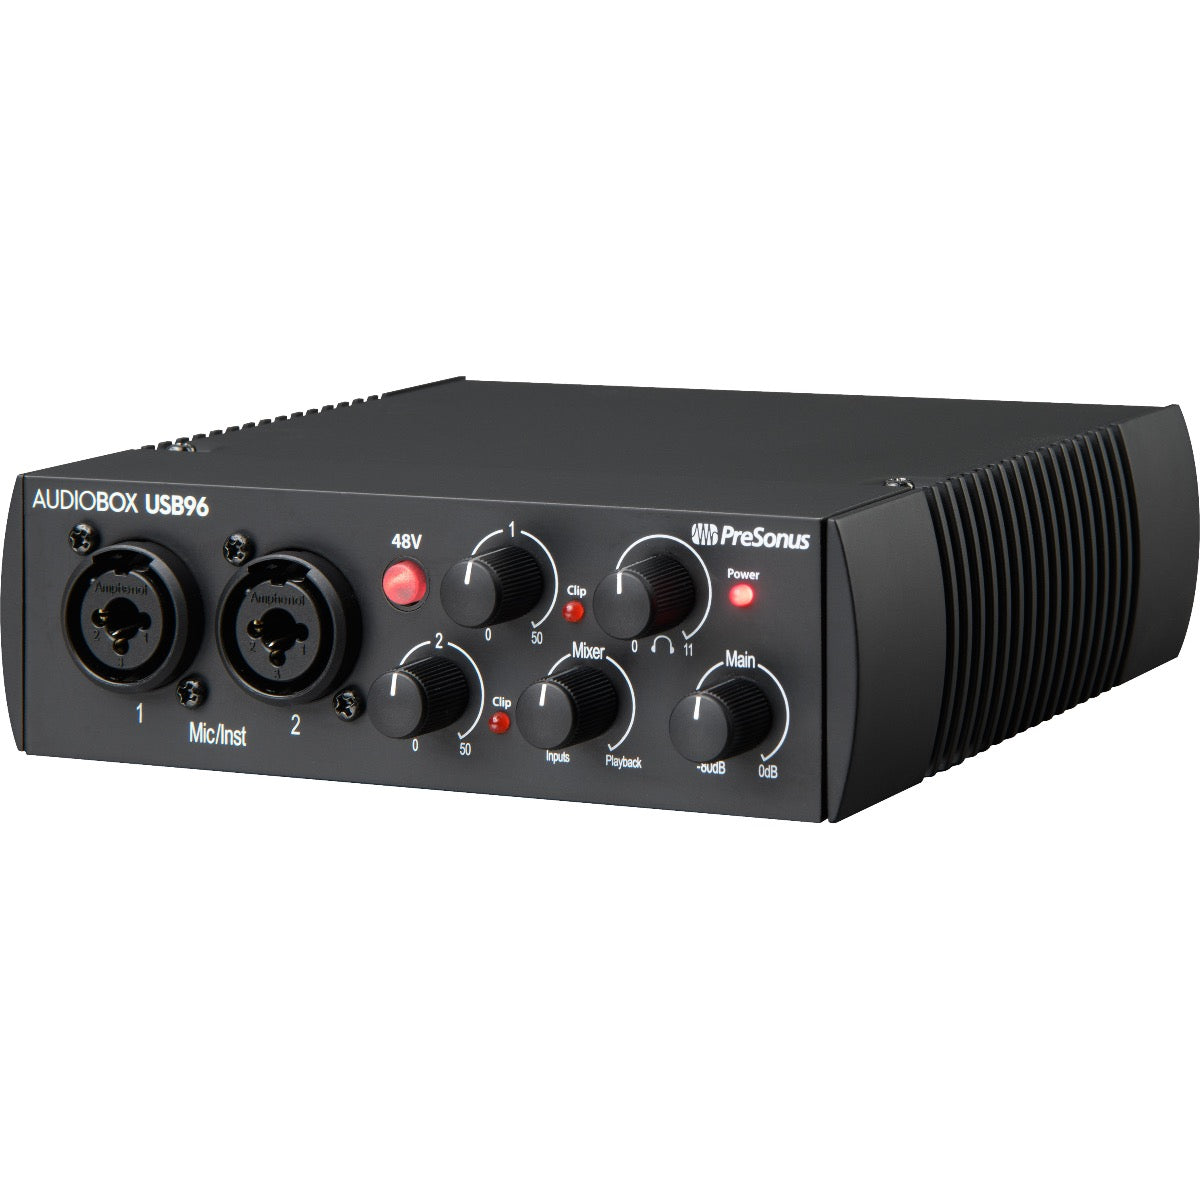 3/4 view of PreSonus AudioBox USB 96 25th Anniversary Edition Audio Interface showing front, top and right side